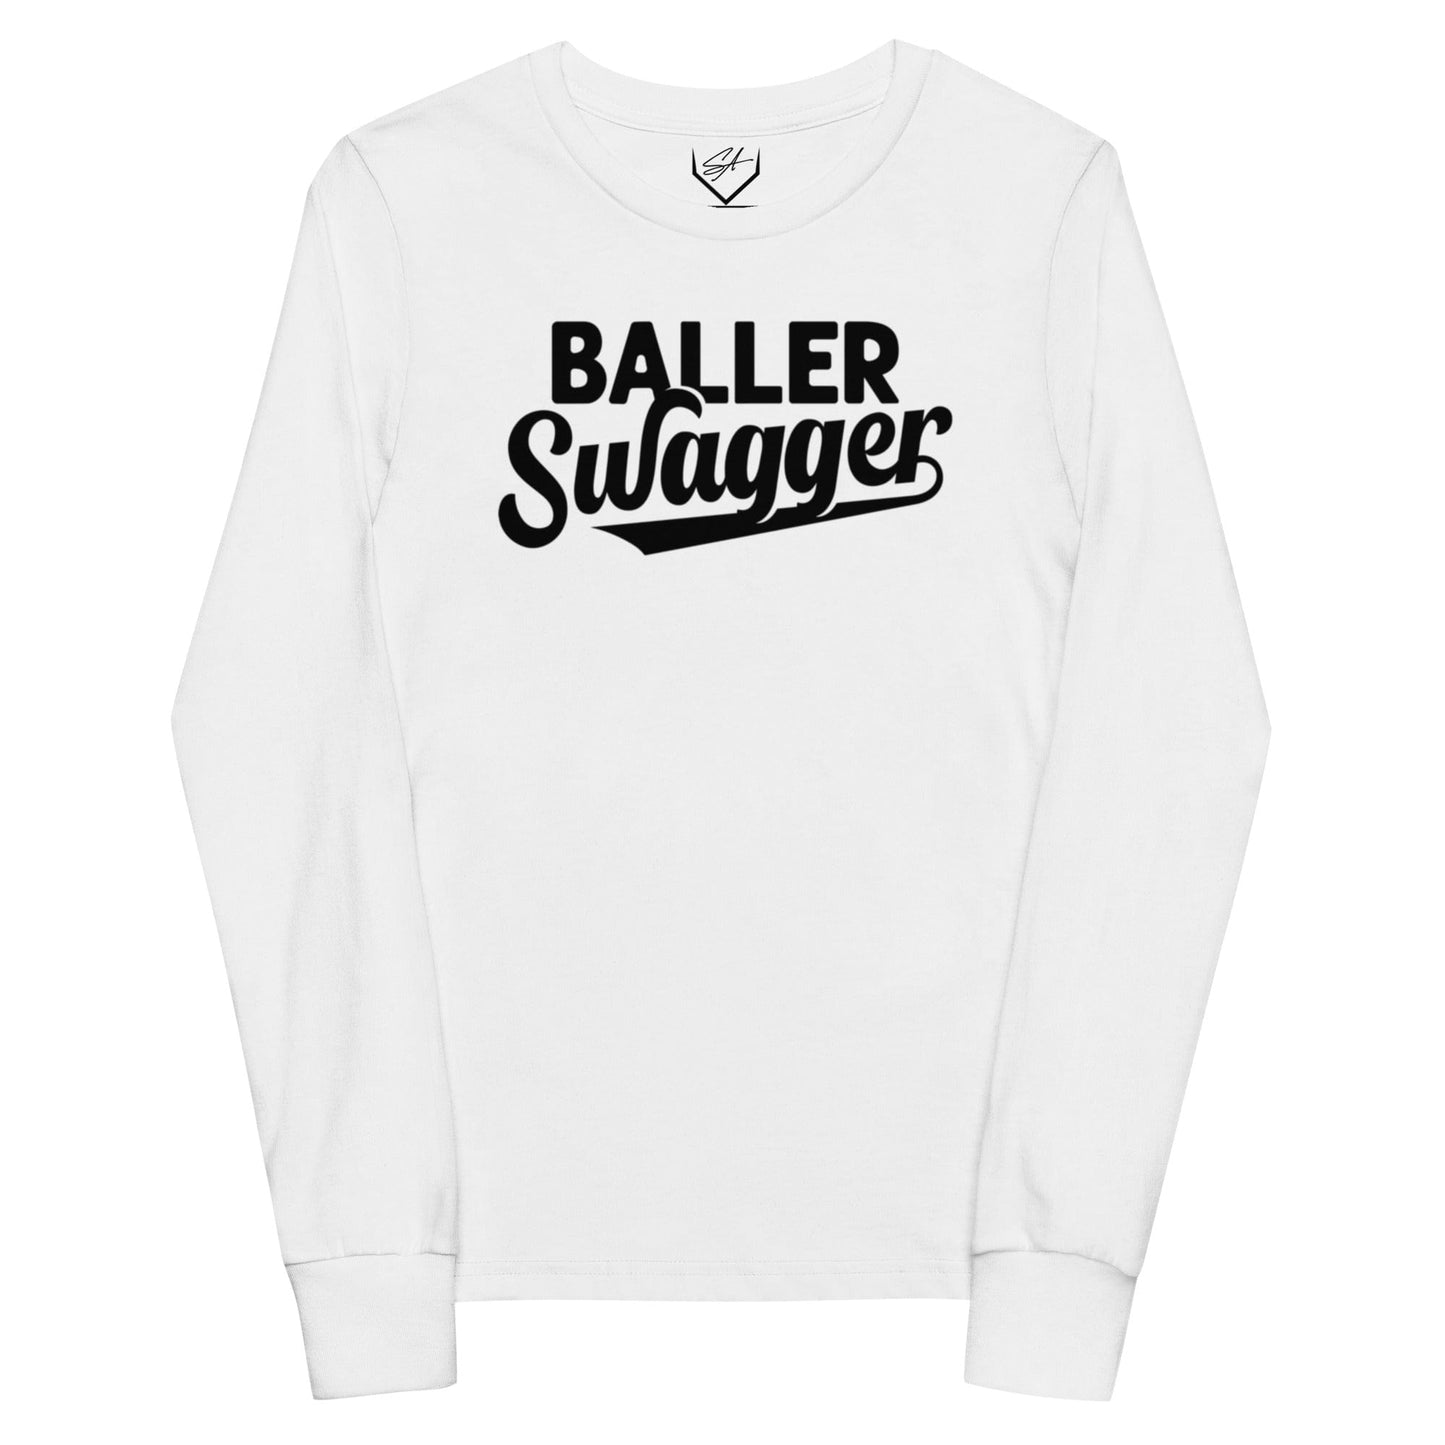 Baller Swagger - Youth Long Sleeve